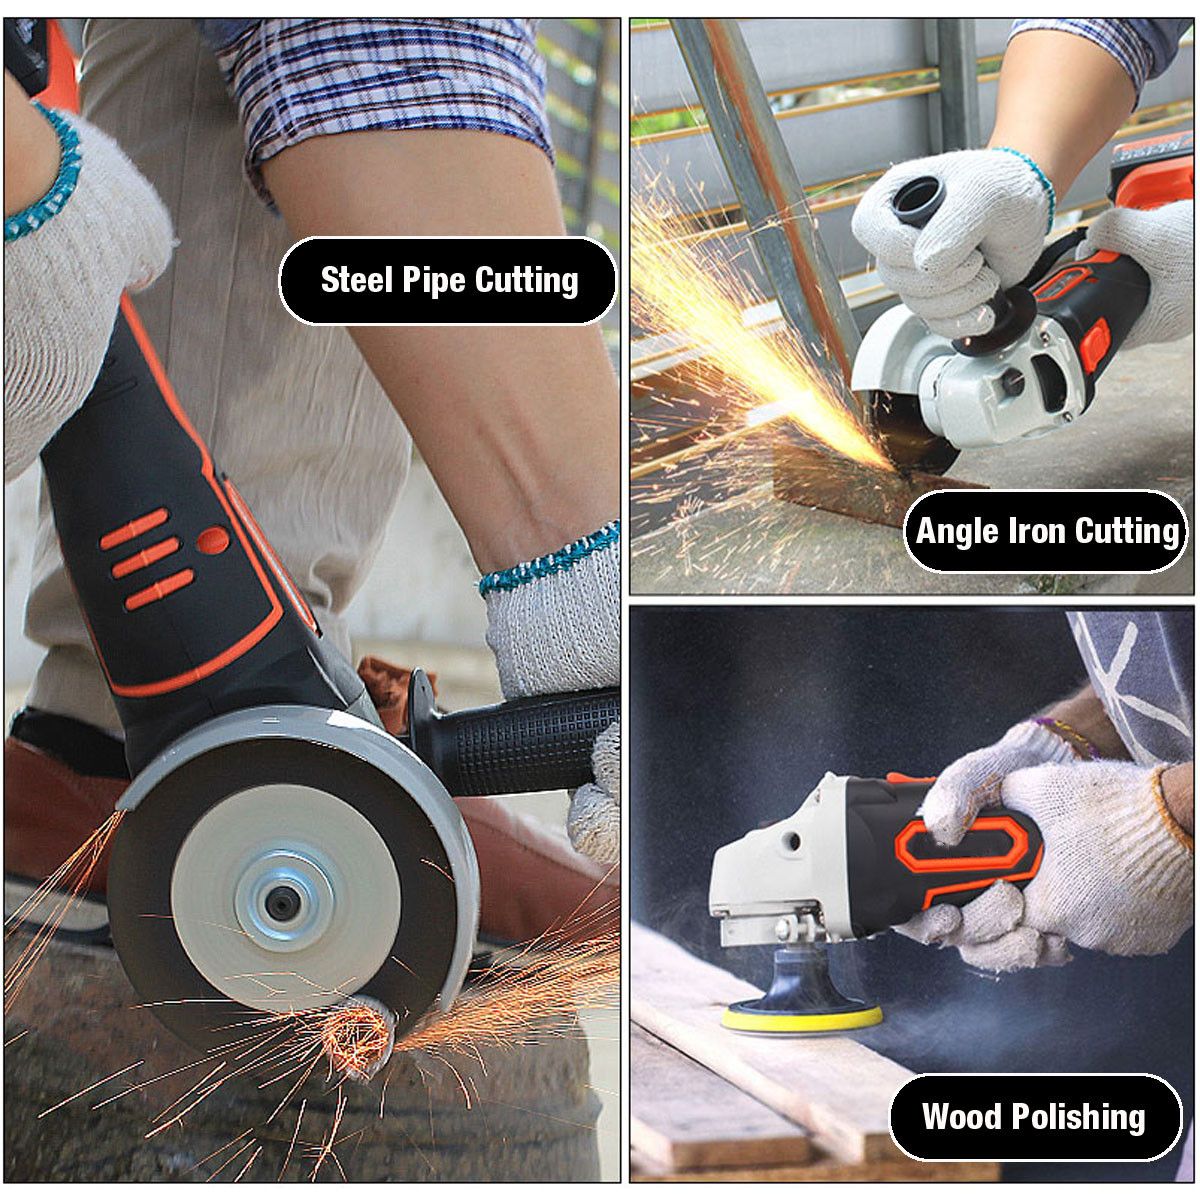 128VF-1300W-10000RPM-Cordless-Brushless-Angle-Grinder-with-16800mAh-Li-Ion-Battery-1520444